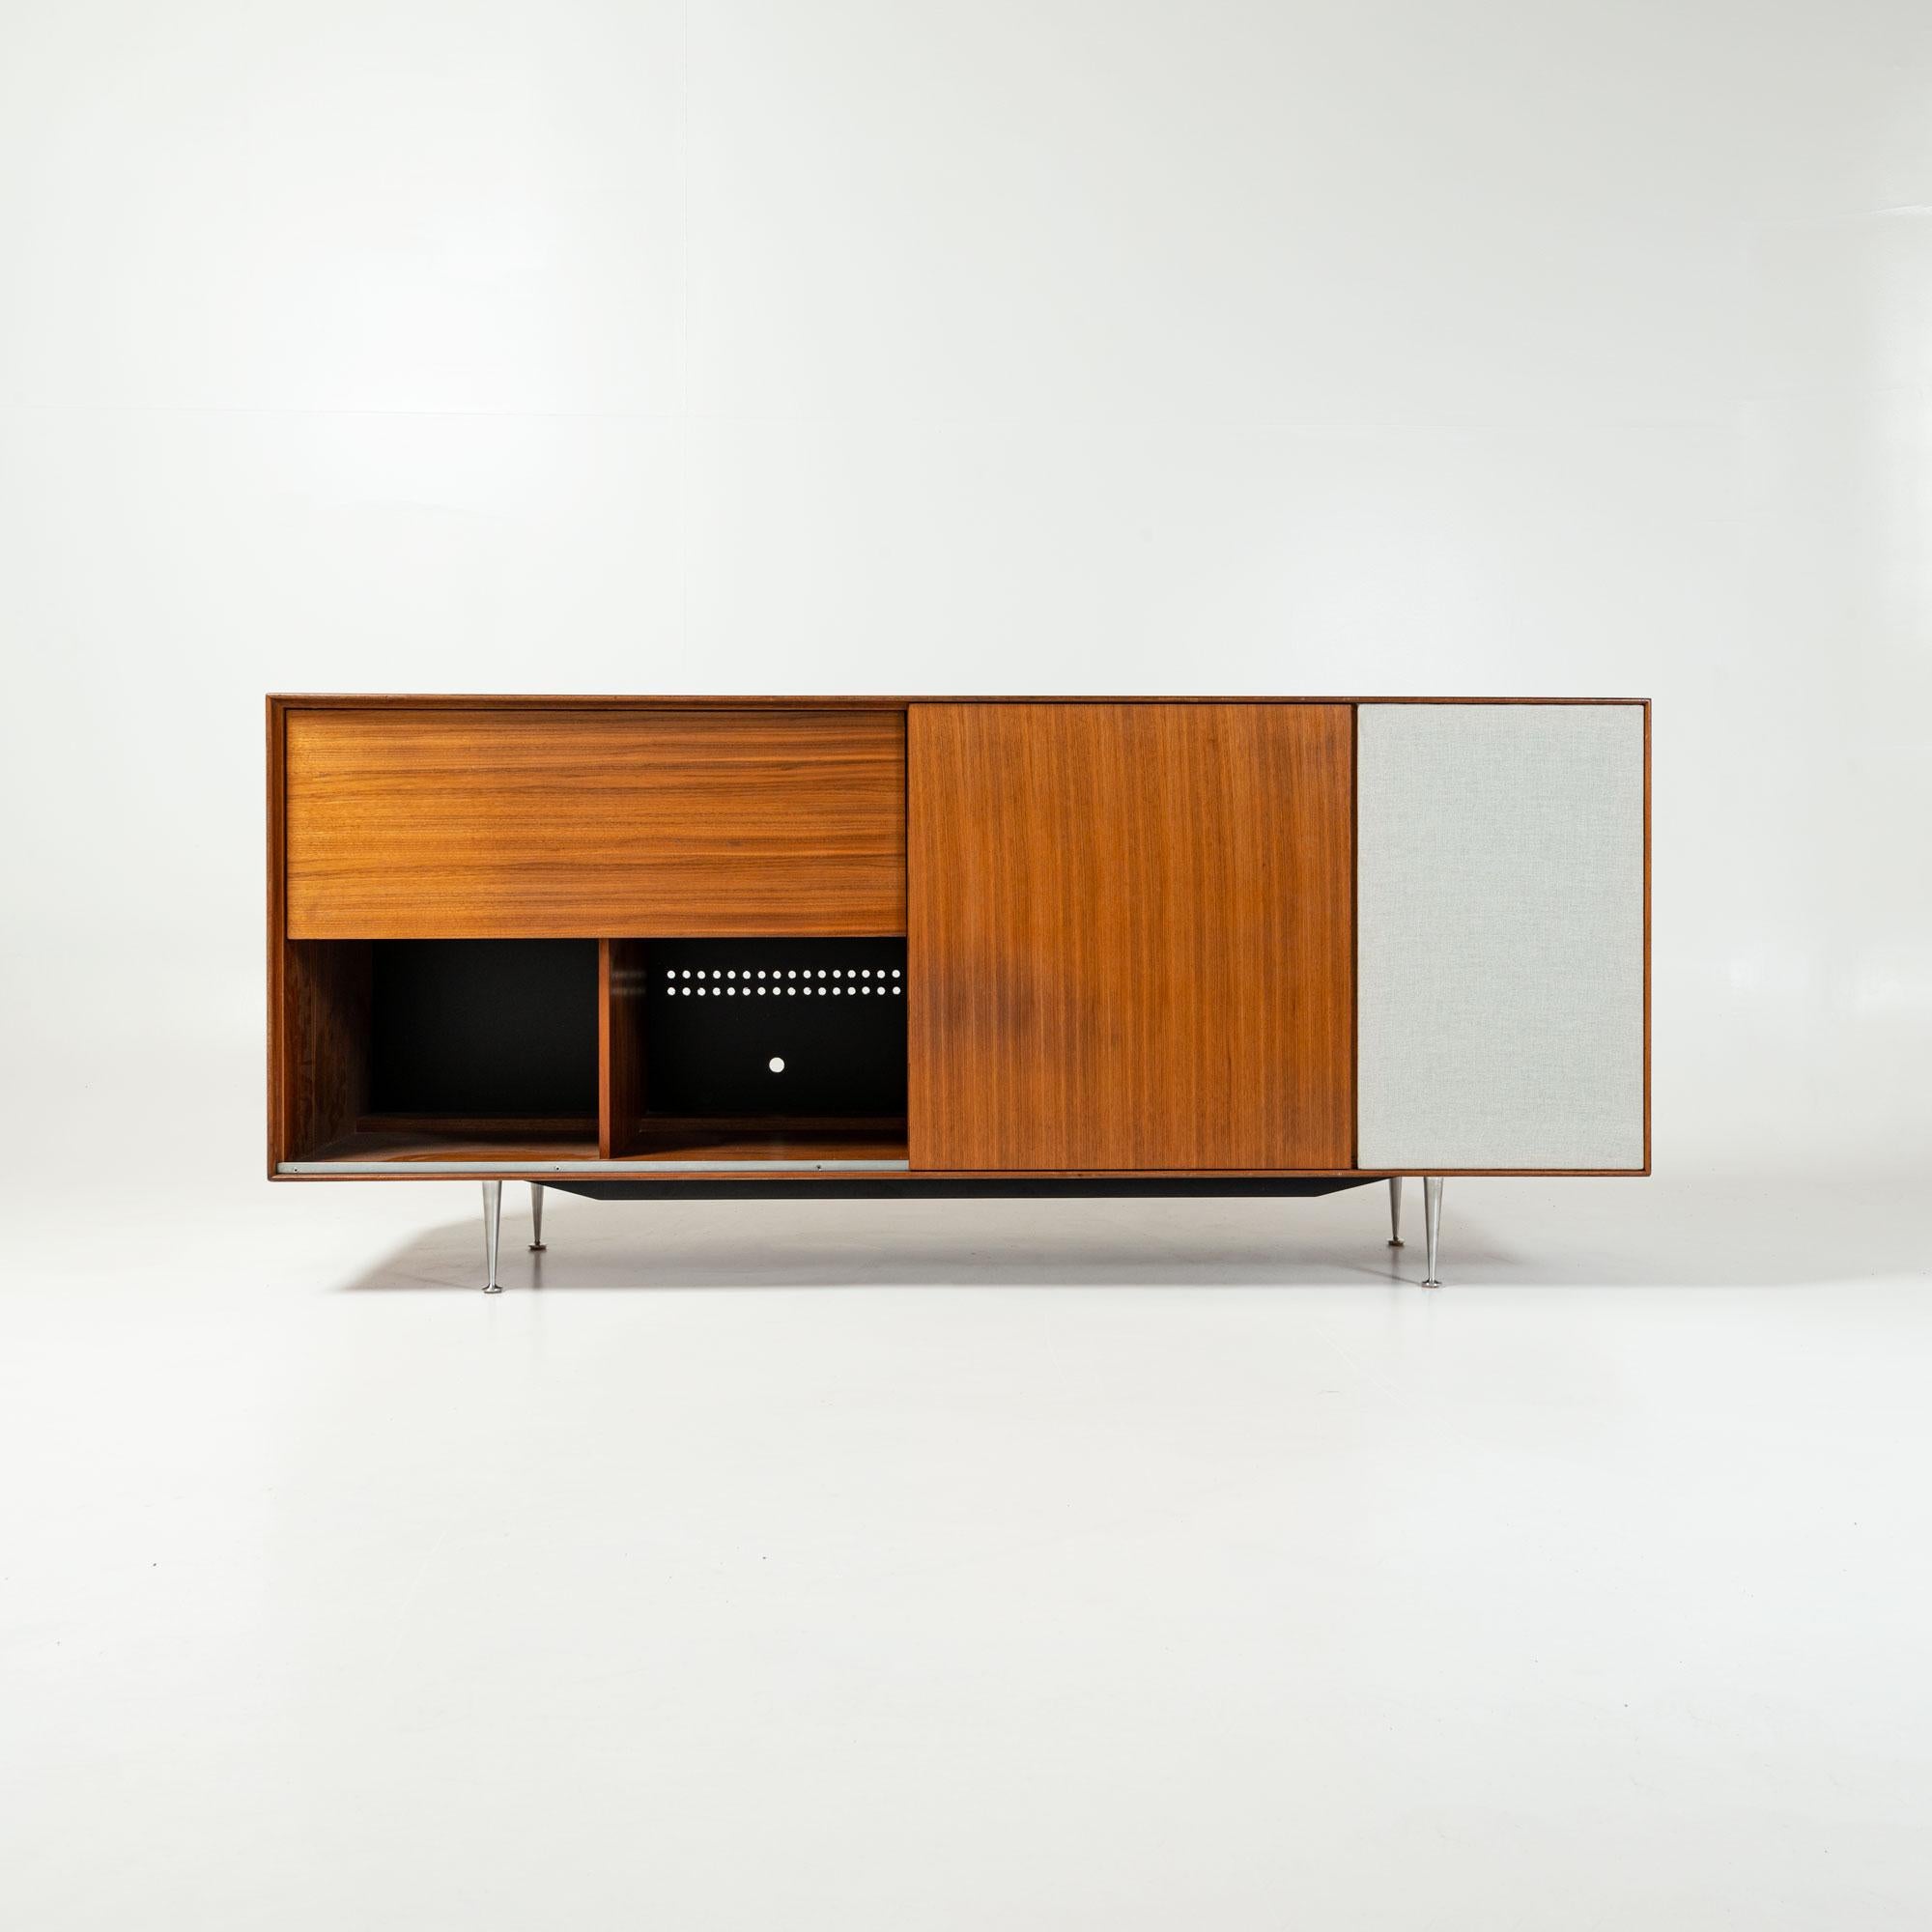 Rare and iconic George Nelson famous Thin Edge Line Hi Fi cabinet in Walnut, produced by Herman Miller in 1950s.

The Cabinet has a total of 6 cabinet space, with the far right designed for a built in speaker. The middle space has adjustable